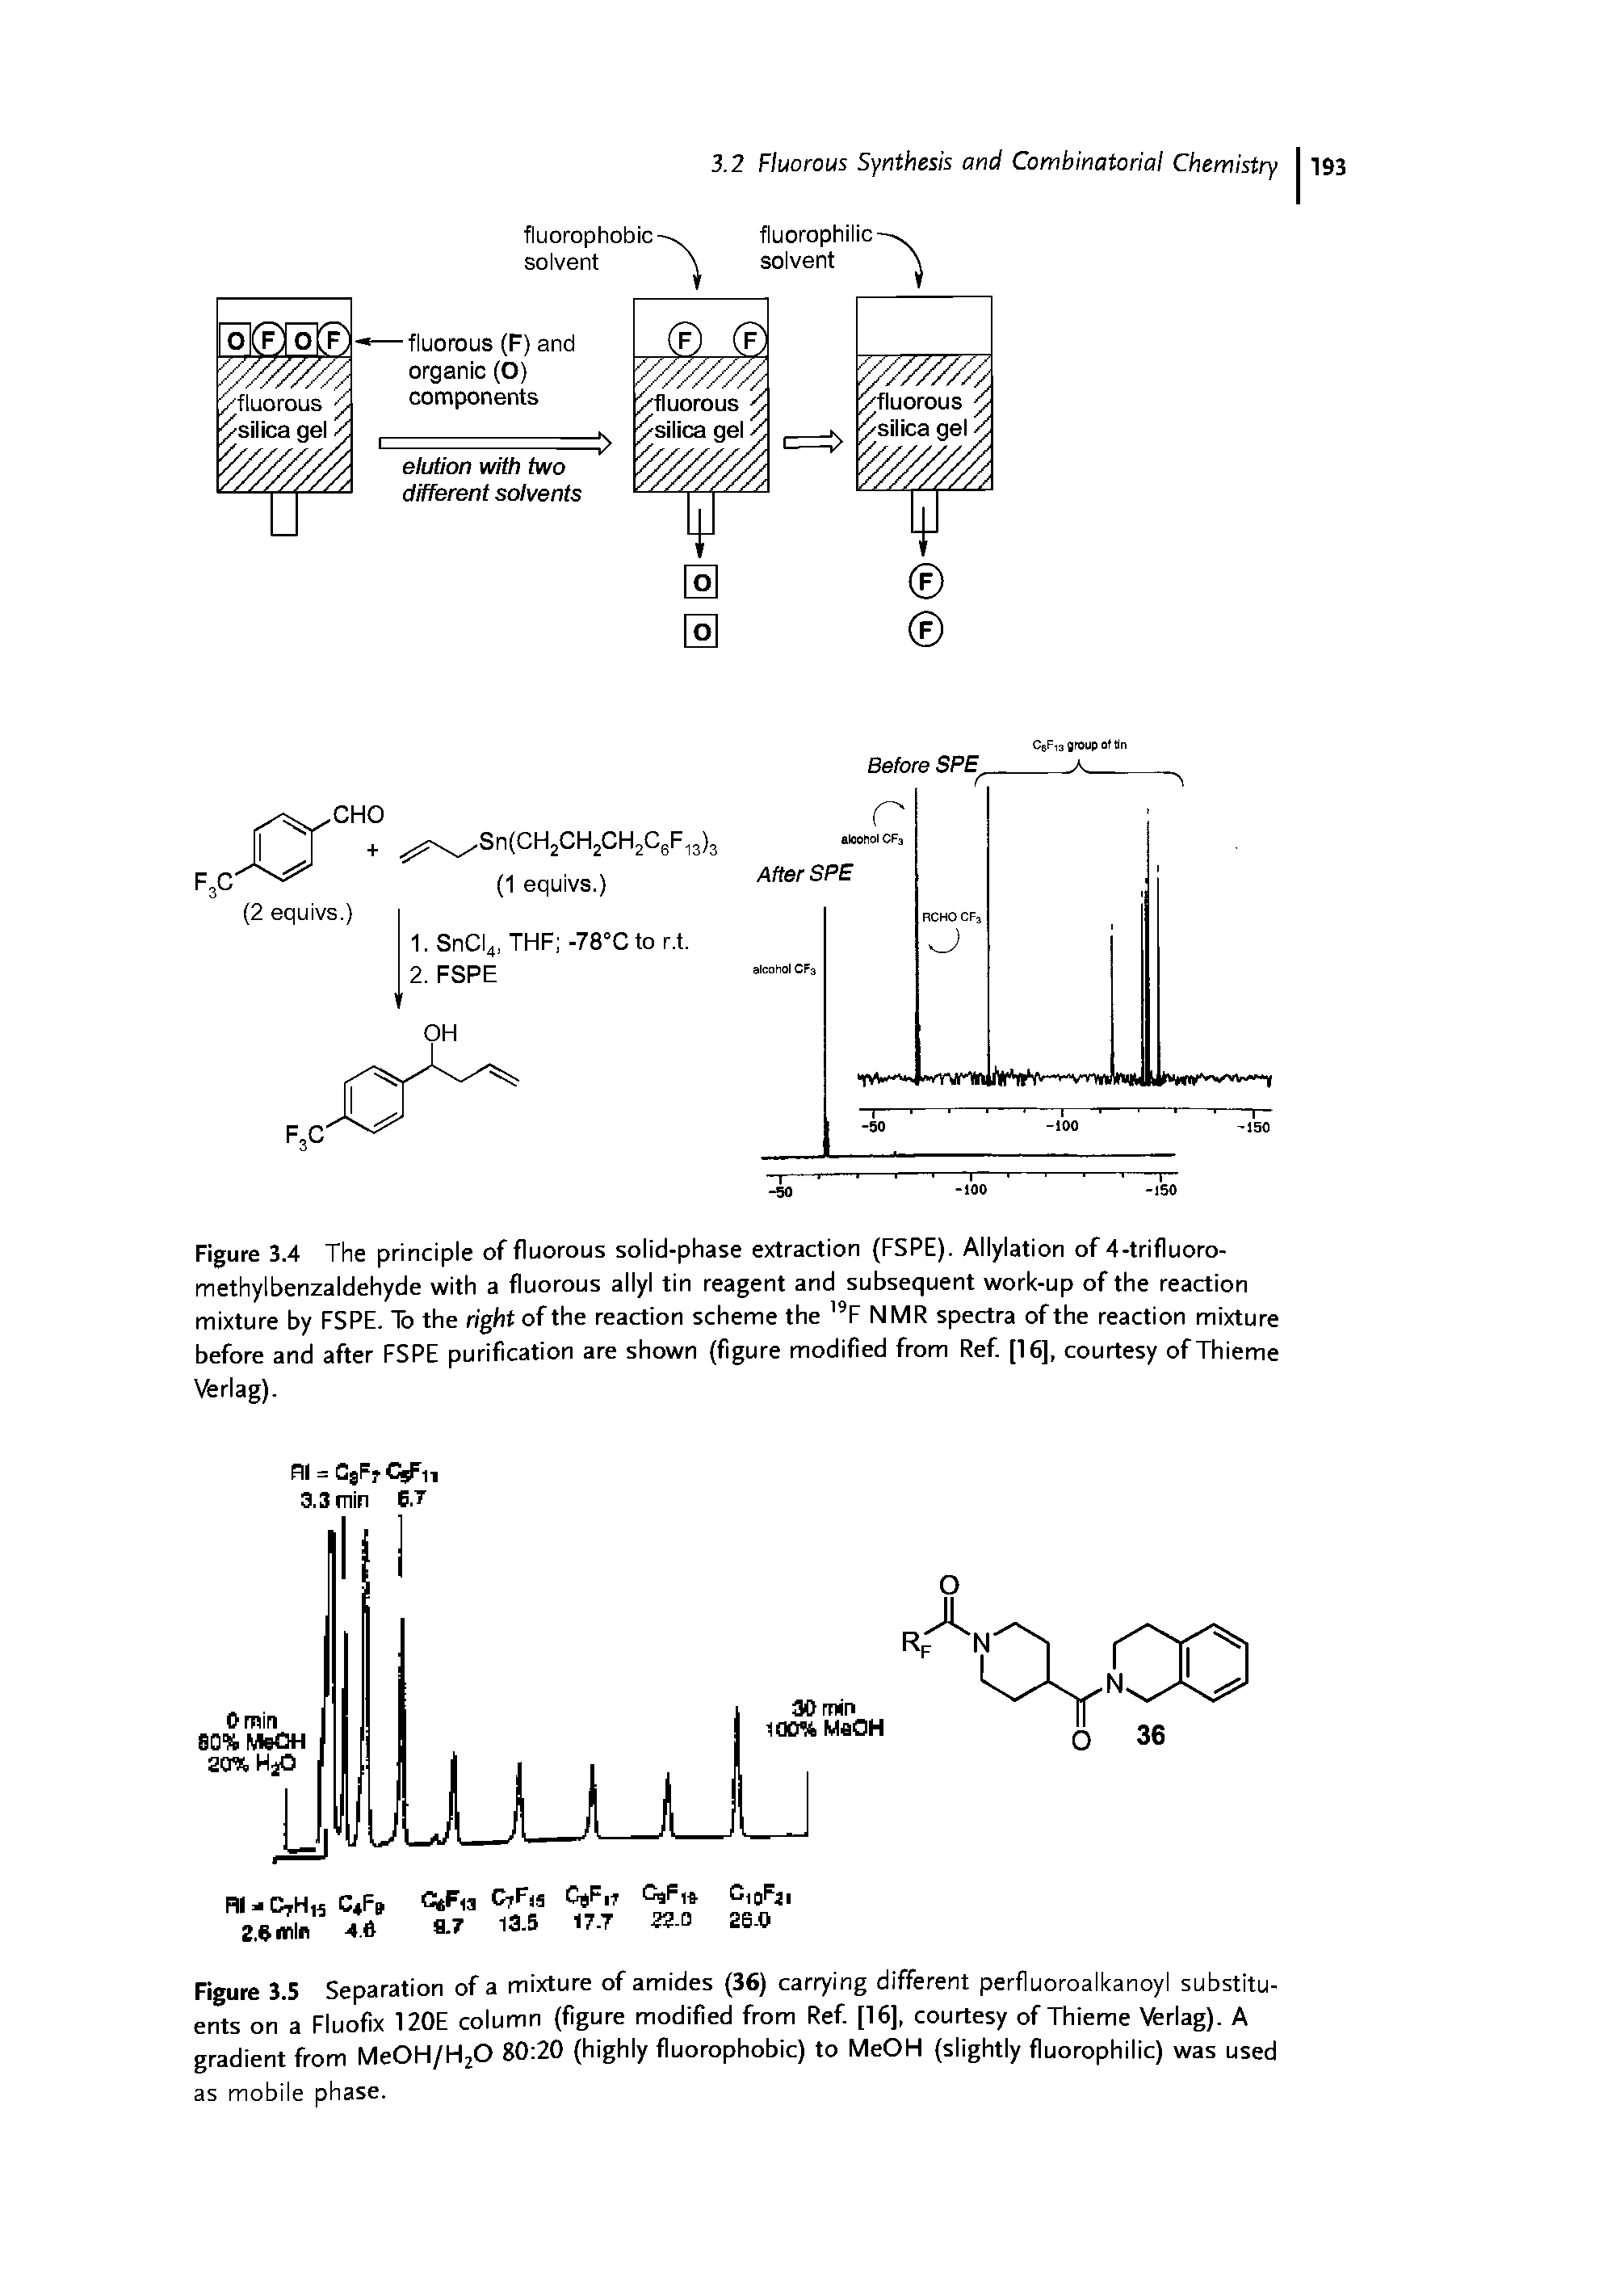 Figure 3.4 The principle of fluorous solid-phase extraction (FSPE). Allylation of 4-trifluoro-methylbenzaldehyde with a fluorous allyl tin reagent and subsequent work-up of the reaction mixture by FSPE. lb the right of the reaction scheme the F NMR spectra of the reaction mixture before and after FSPE purification are shown (figure modified from Ref. [16], courtesy ofThieme Verlag).